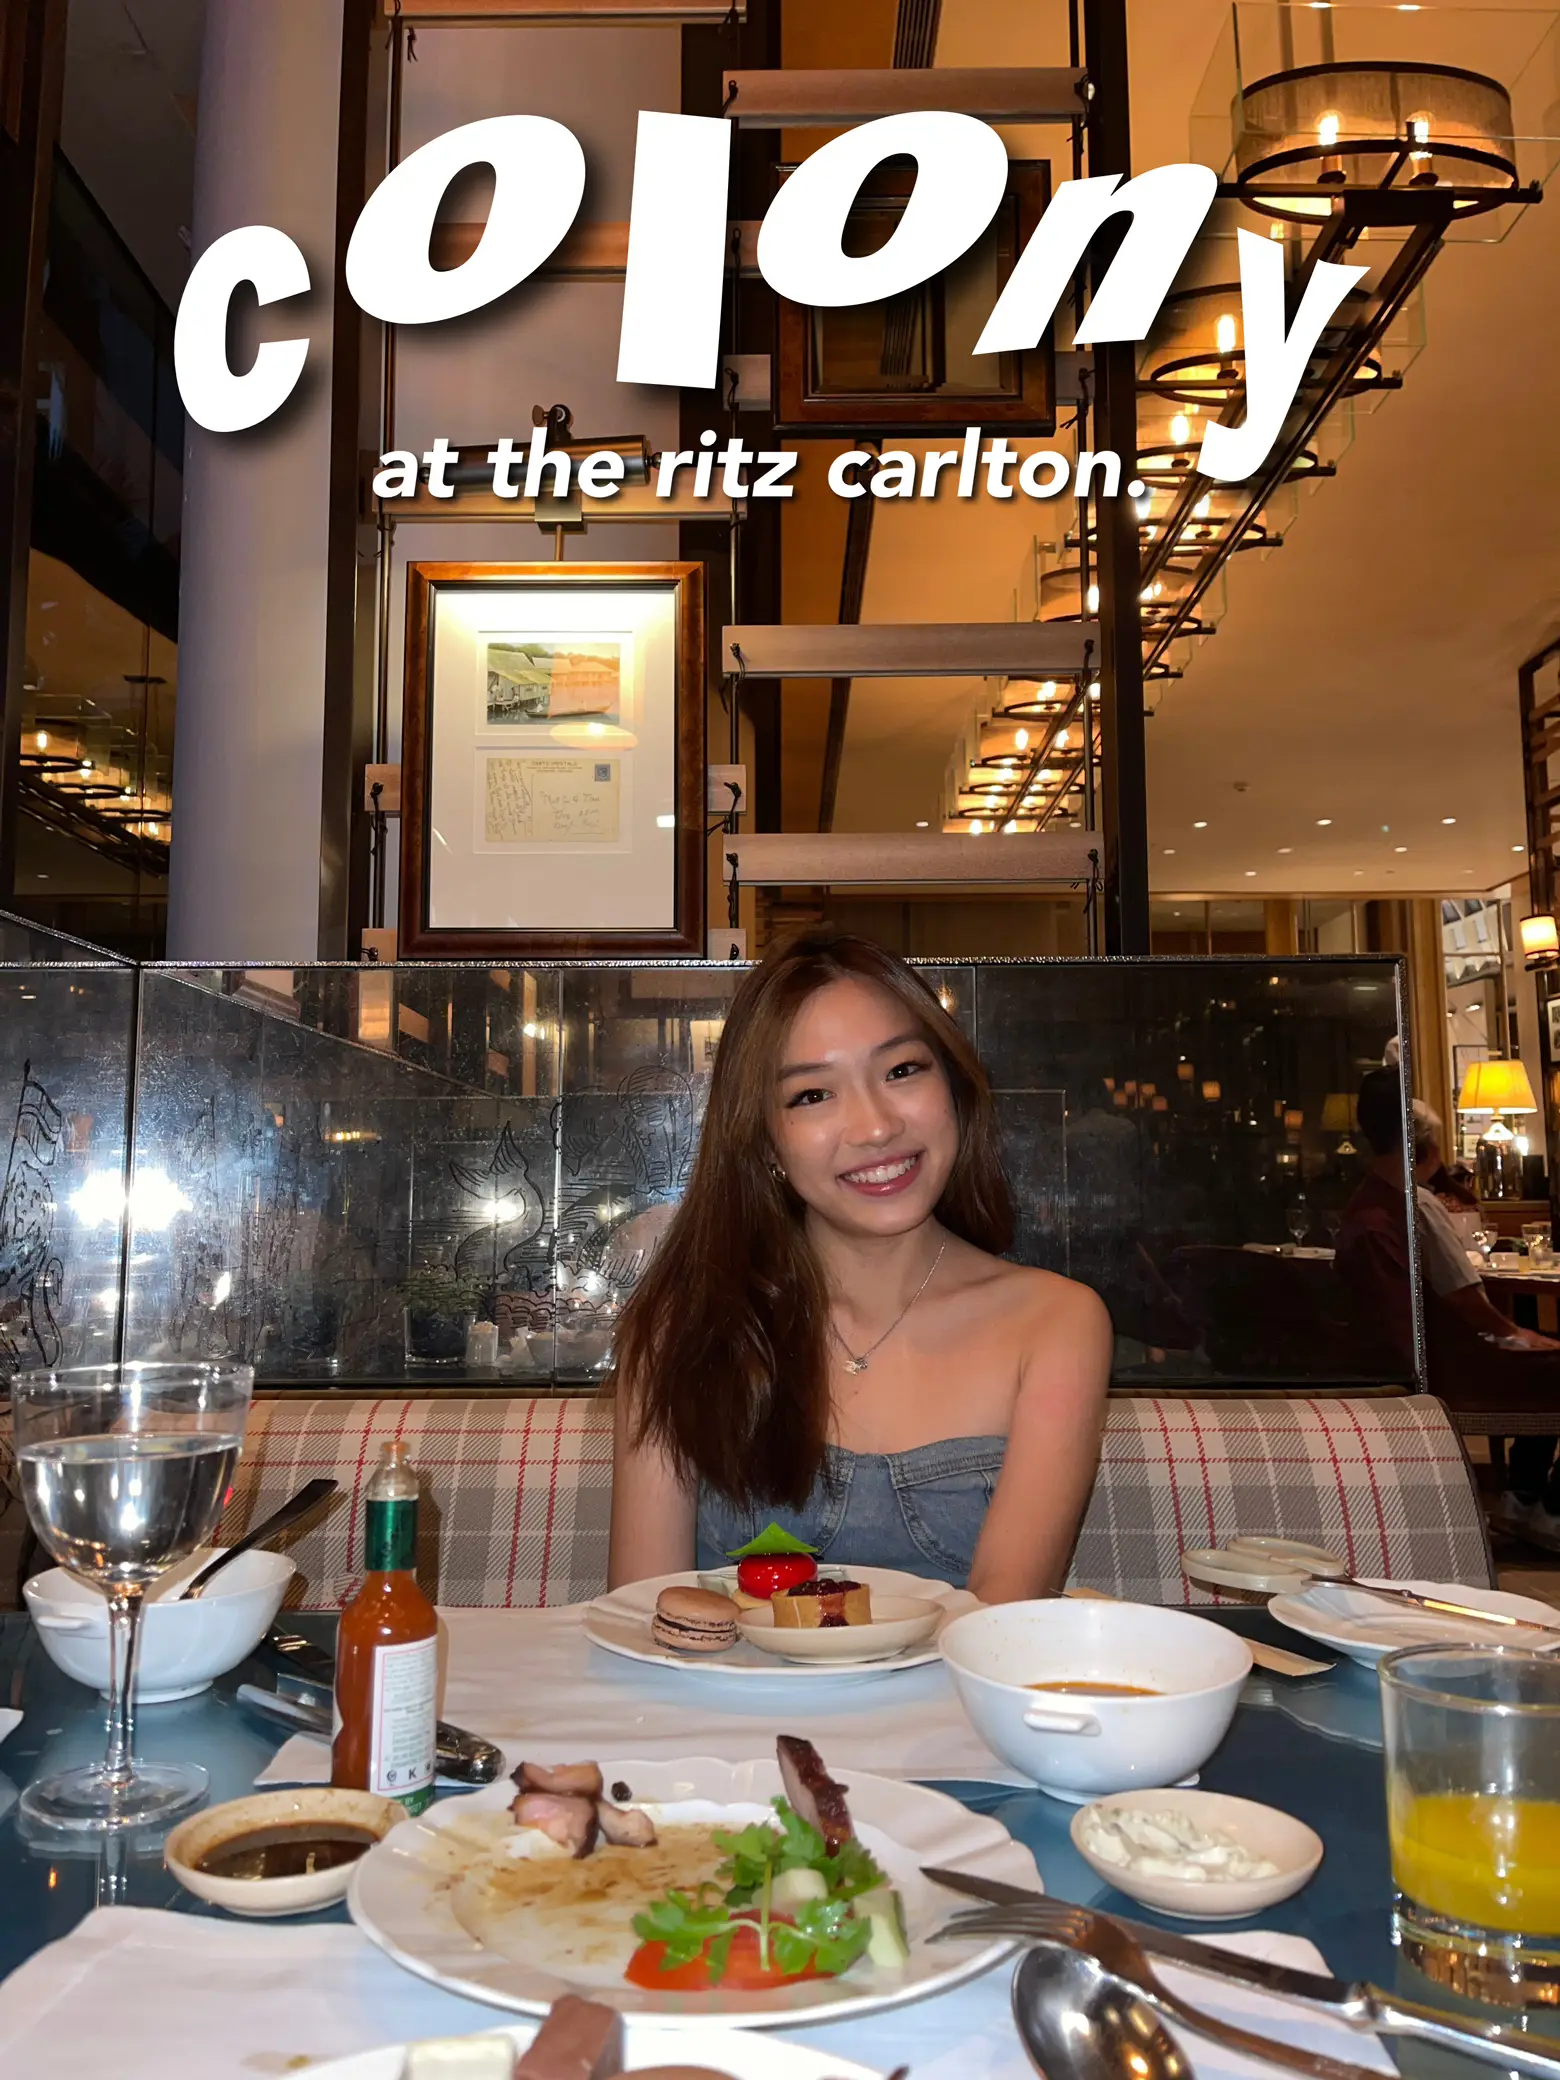 MUST VISIT: colony @ the ritz carlton 🍣😋🍴's images